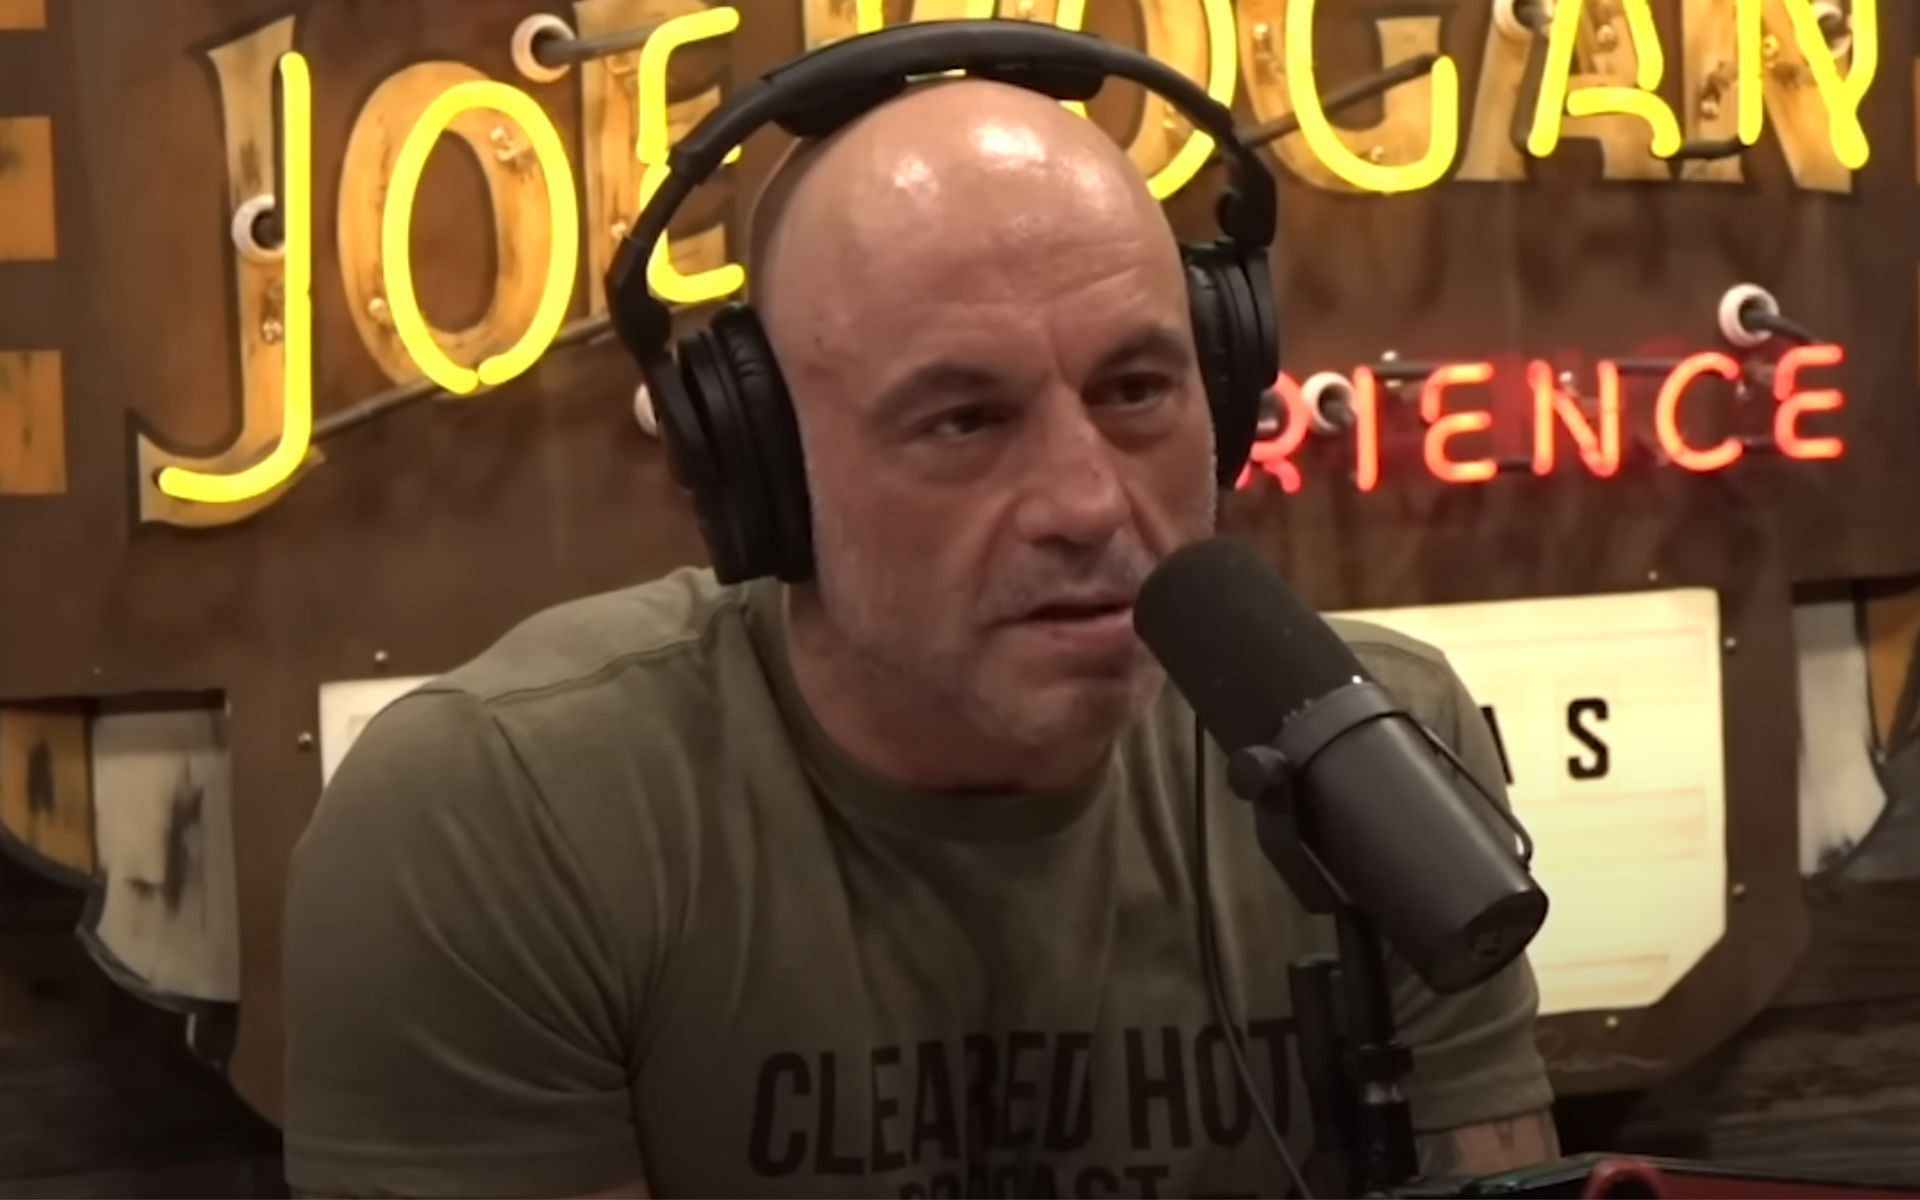 Podcaster and UFC commentator Joe Rogan [*Image courtesy: PowerfulJRE YouTube channel]